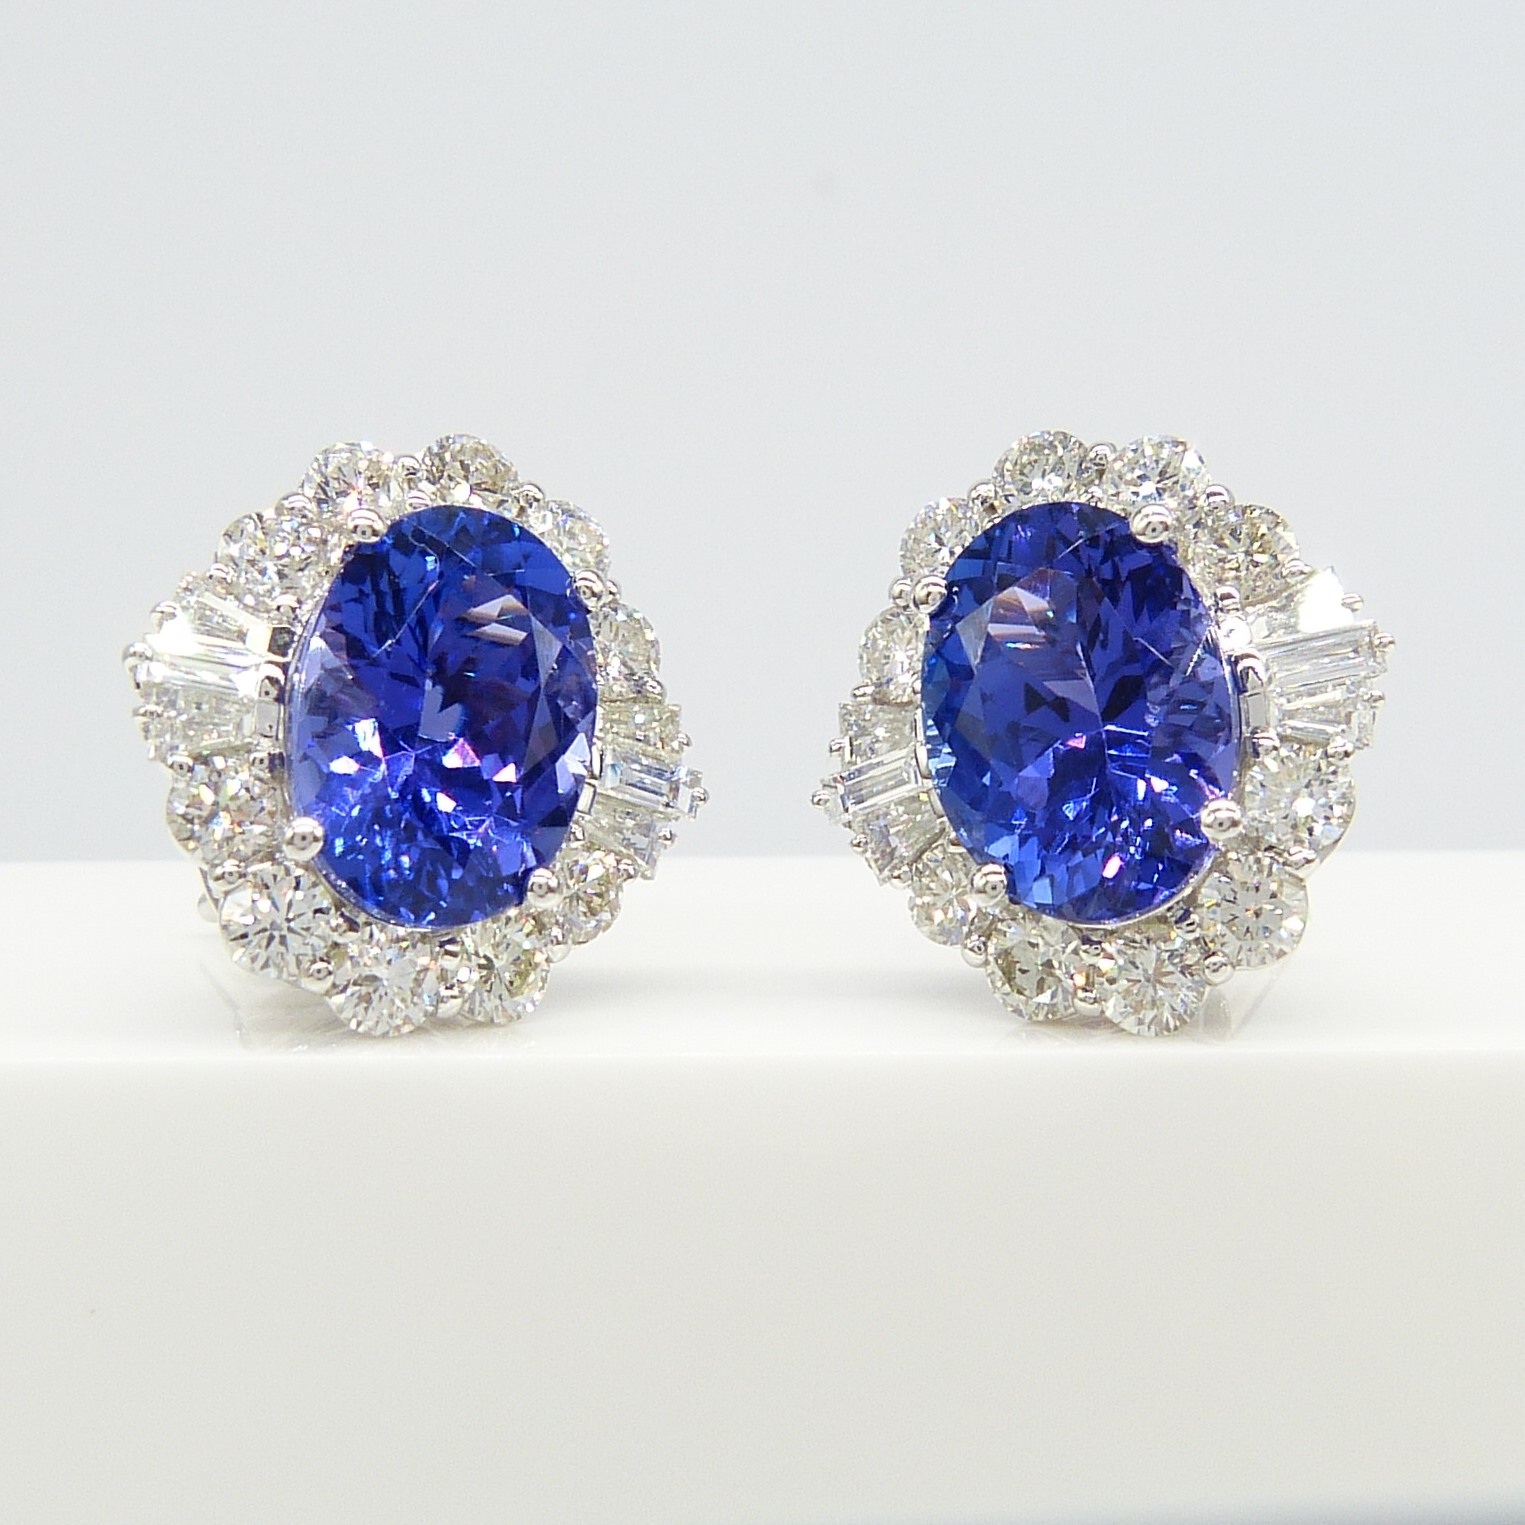 A large pair of loupe-clean tanzanite and diamond cluster earrings in 18ct white gold, certificated